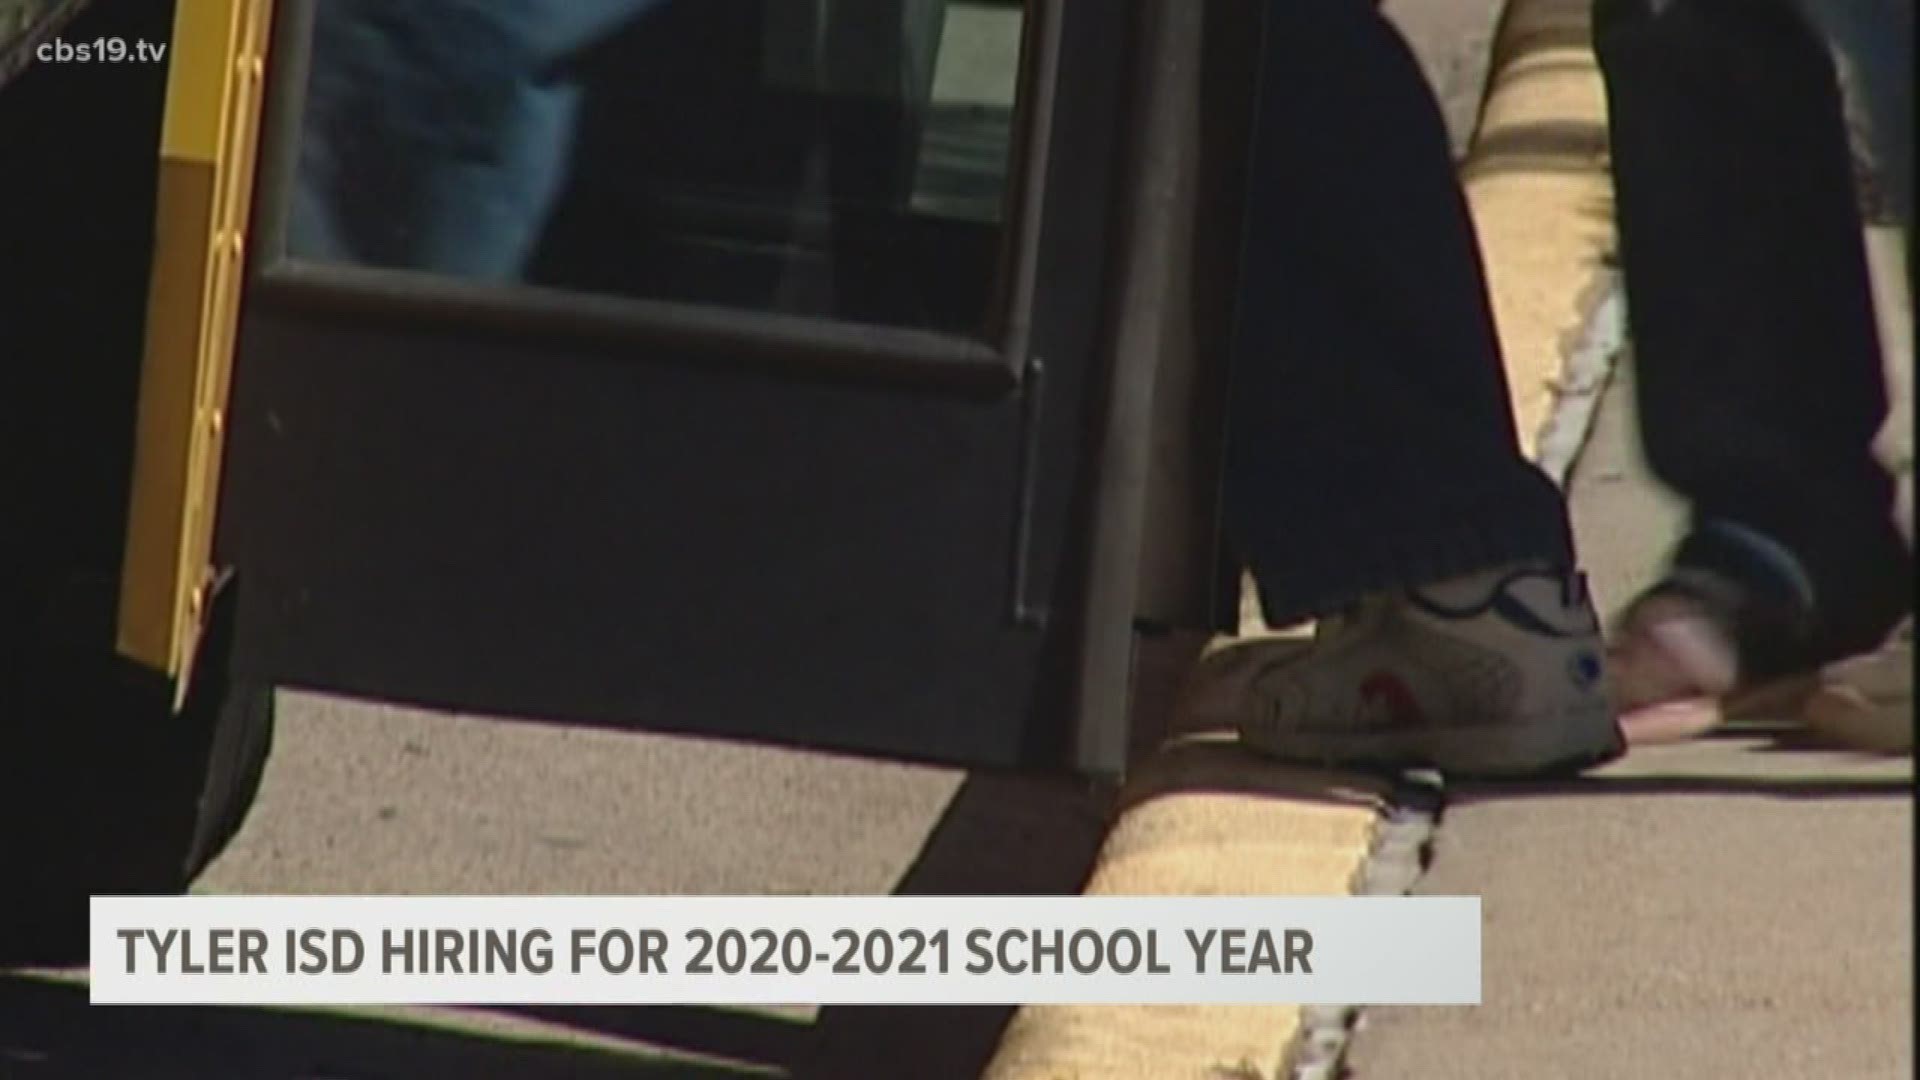 Despite schools not being open right now, Tyler ISD is still hiring for the 2020 - 2021 school year via virtual interviews.